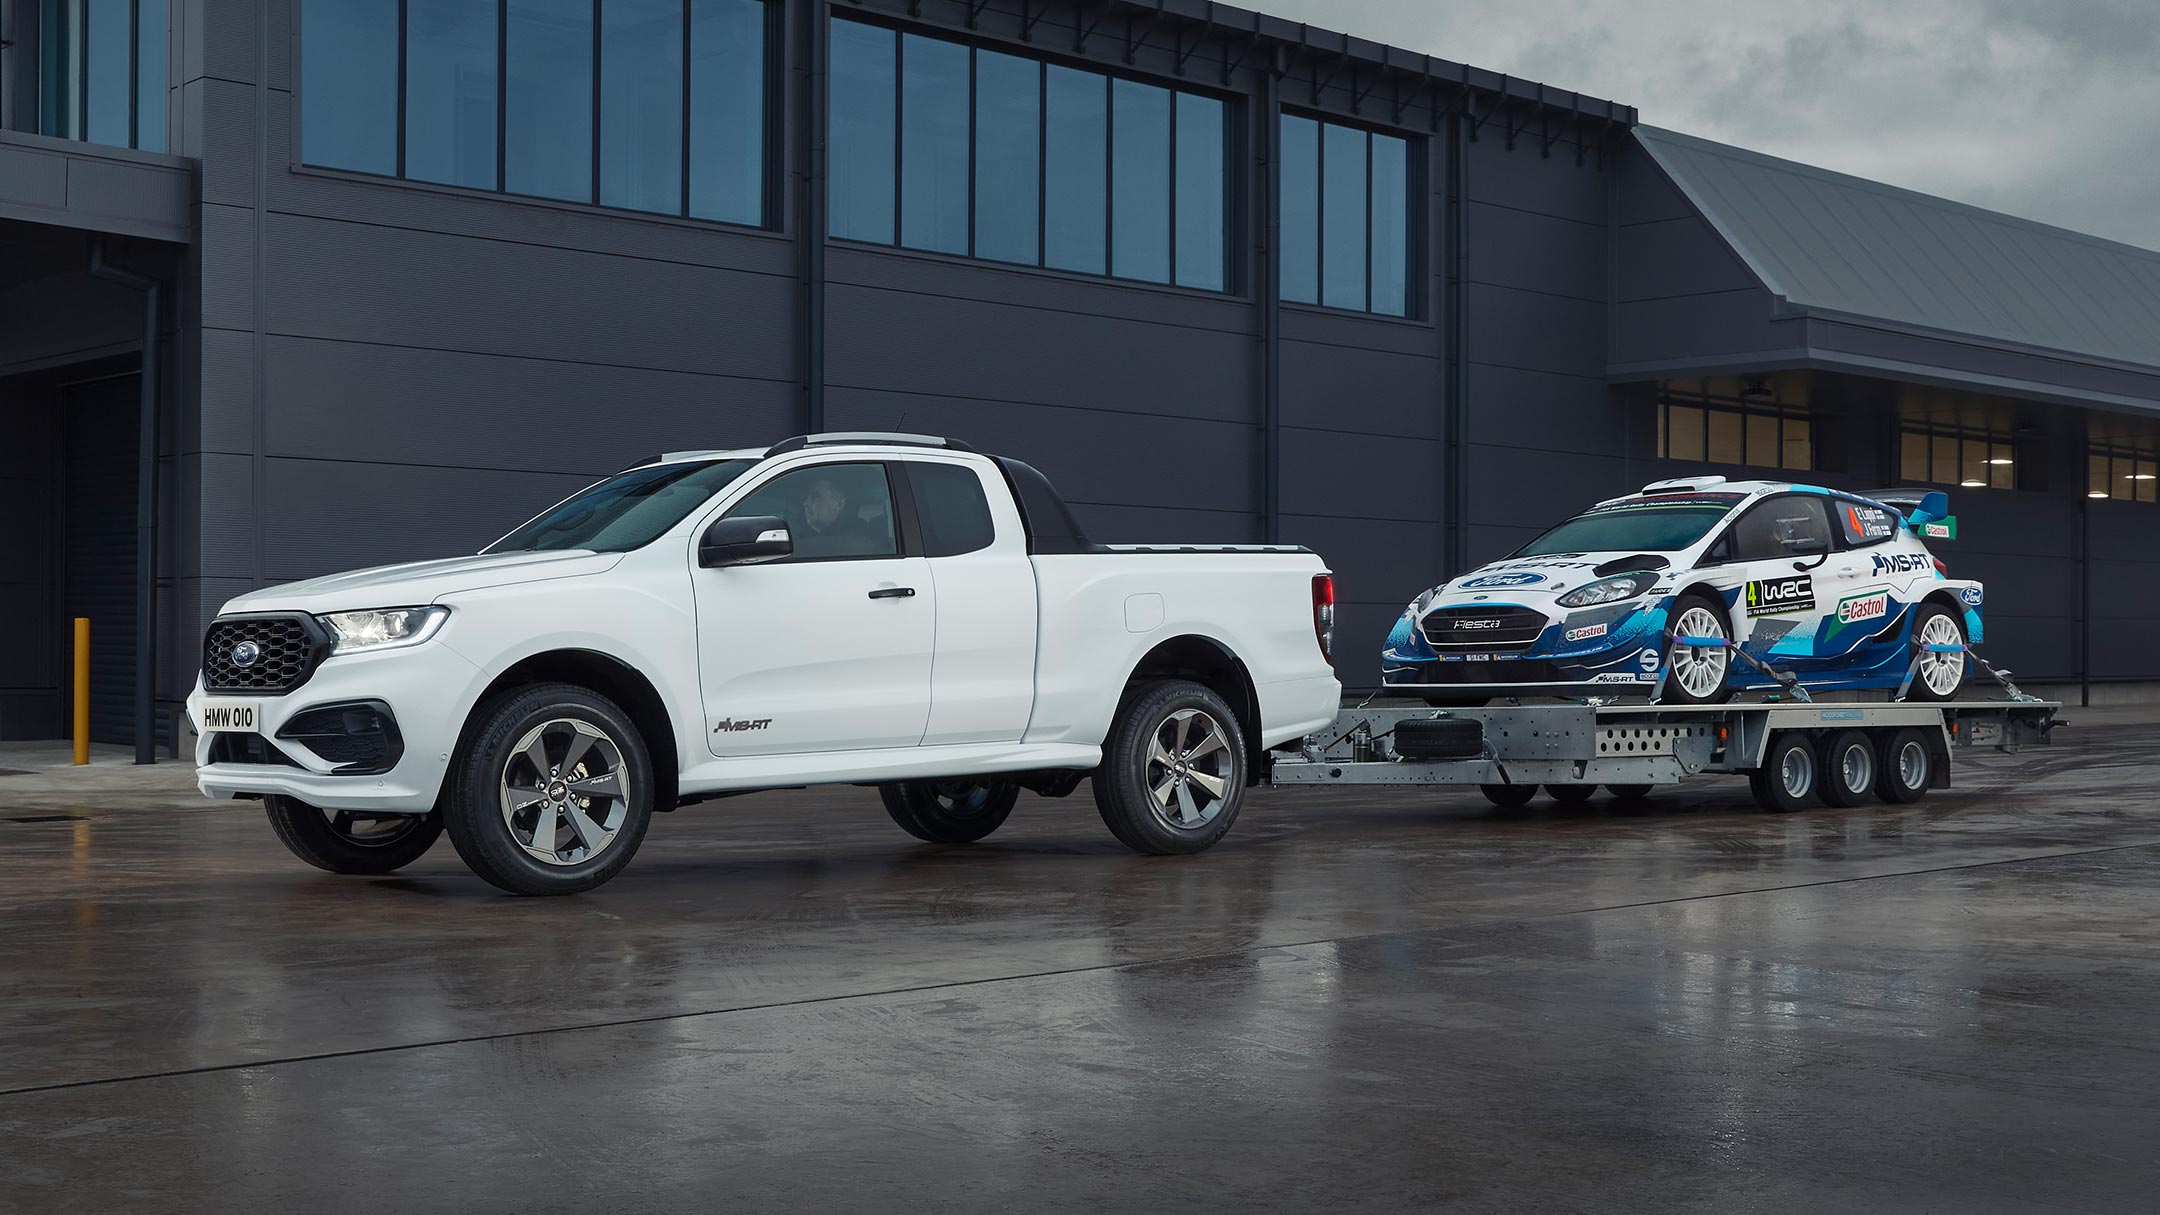 Ford Ranger MS-RT towing race car